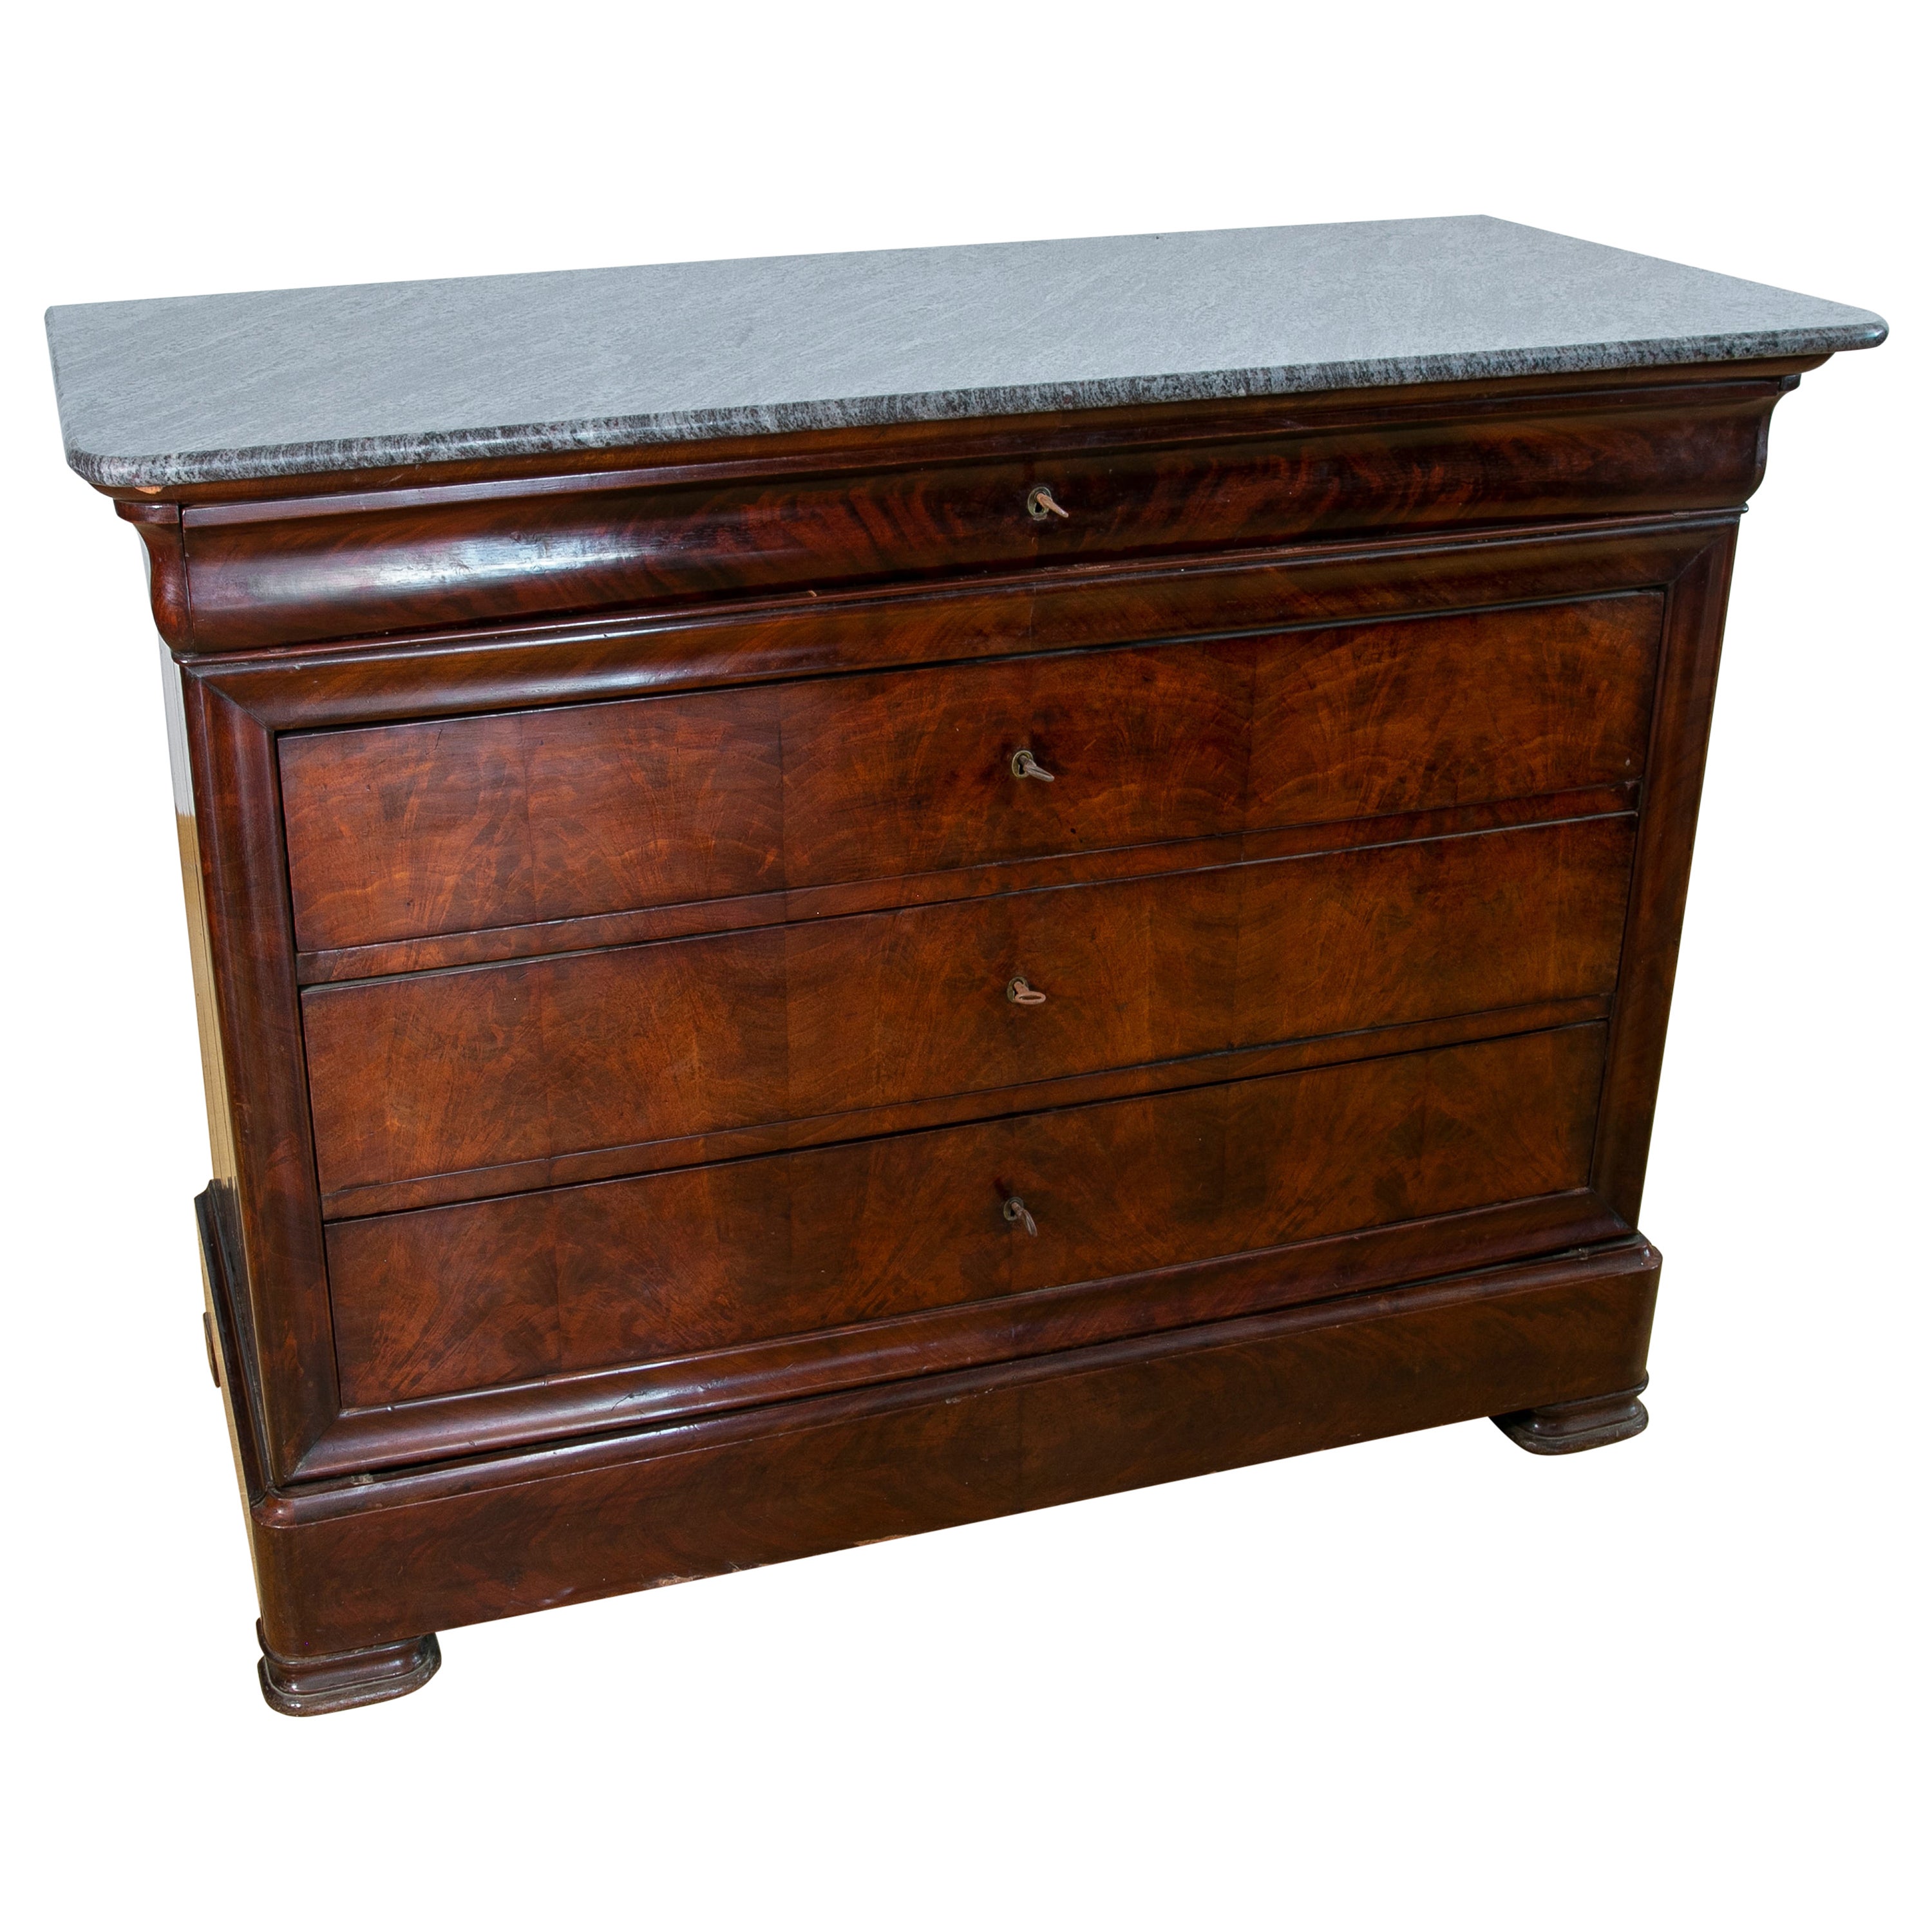 English Mahogany Chest of Drawers with Four Drawers and Marble Top